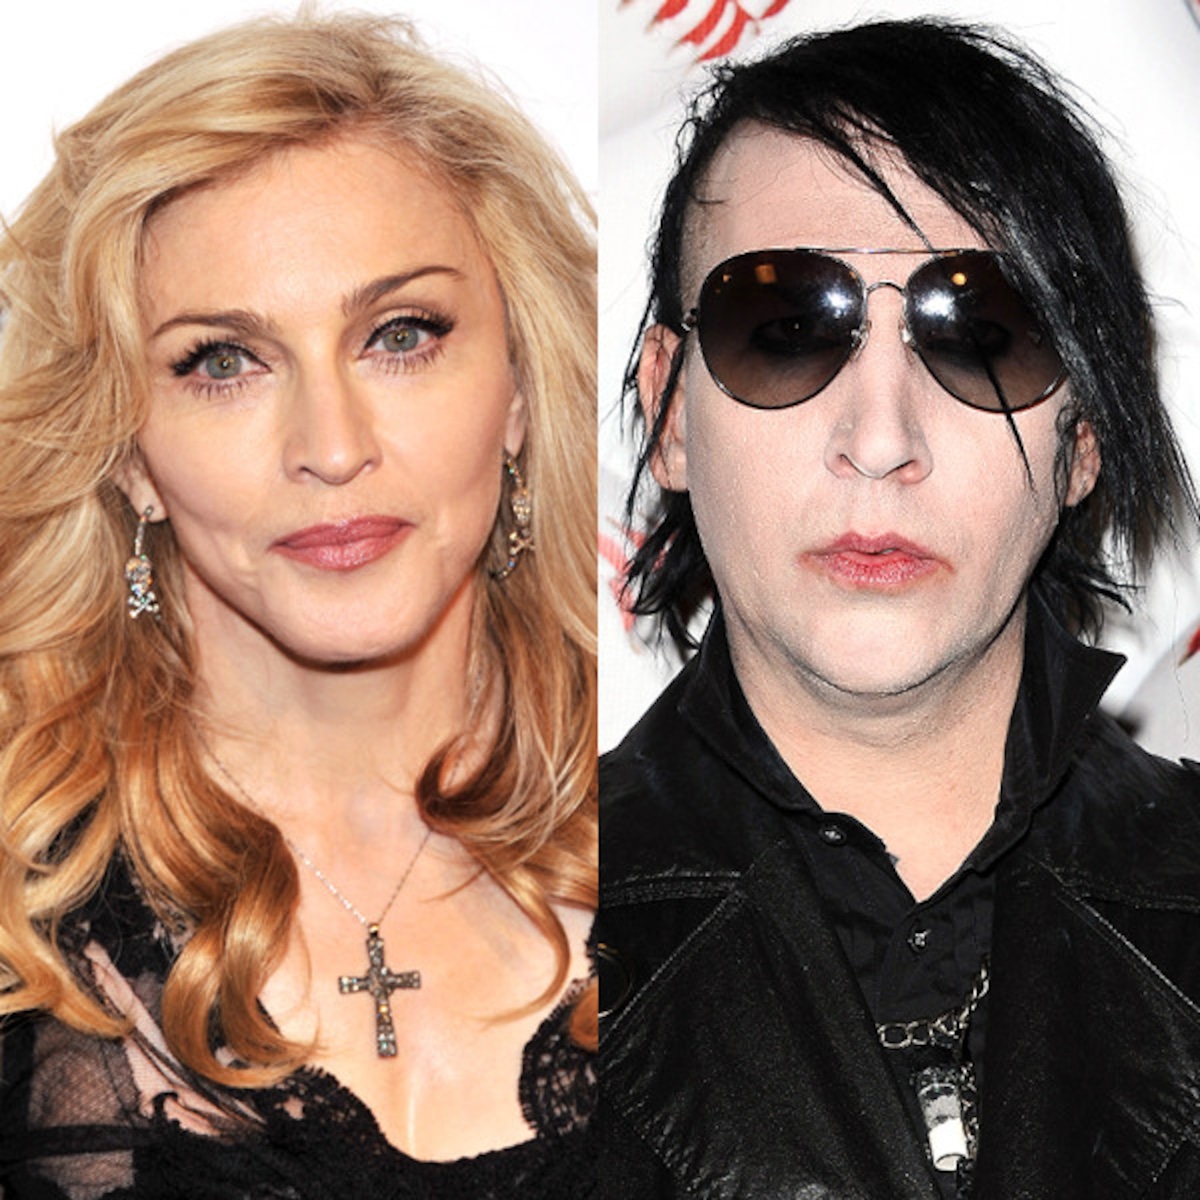 Madonna Responds to Marilyn Manson's Offer of Sex